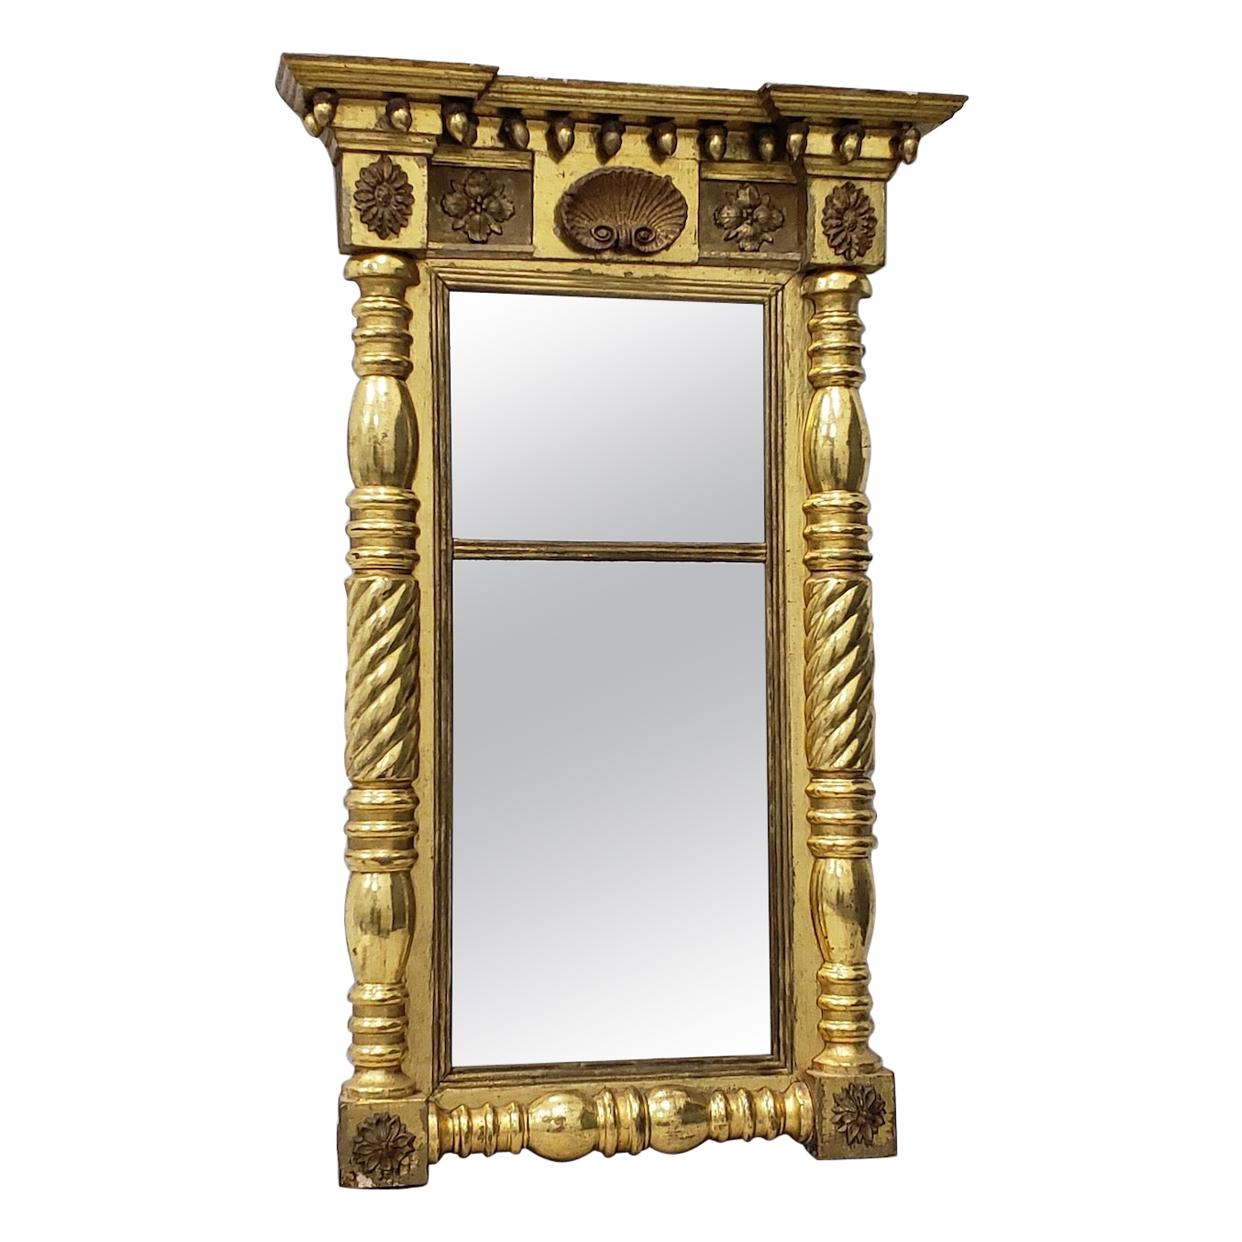 Early 19th Century American Hand Carved and Gilded Mirror, circa 1820s